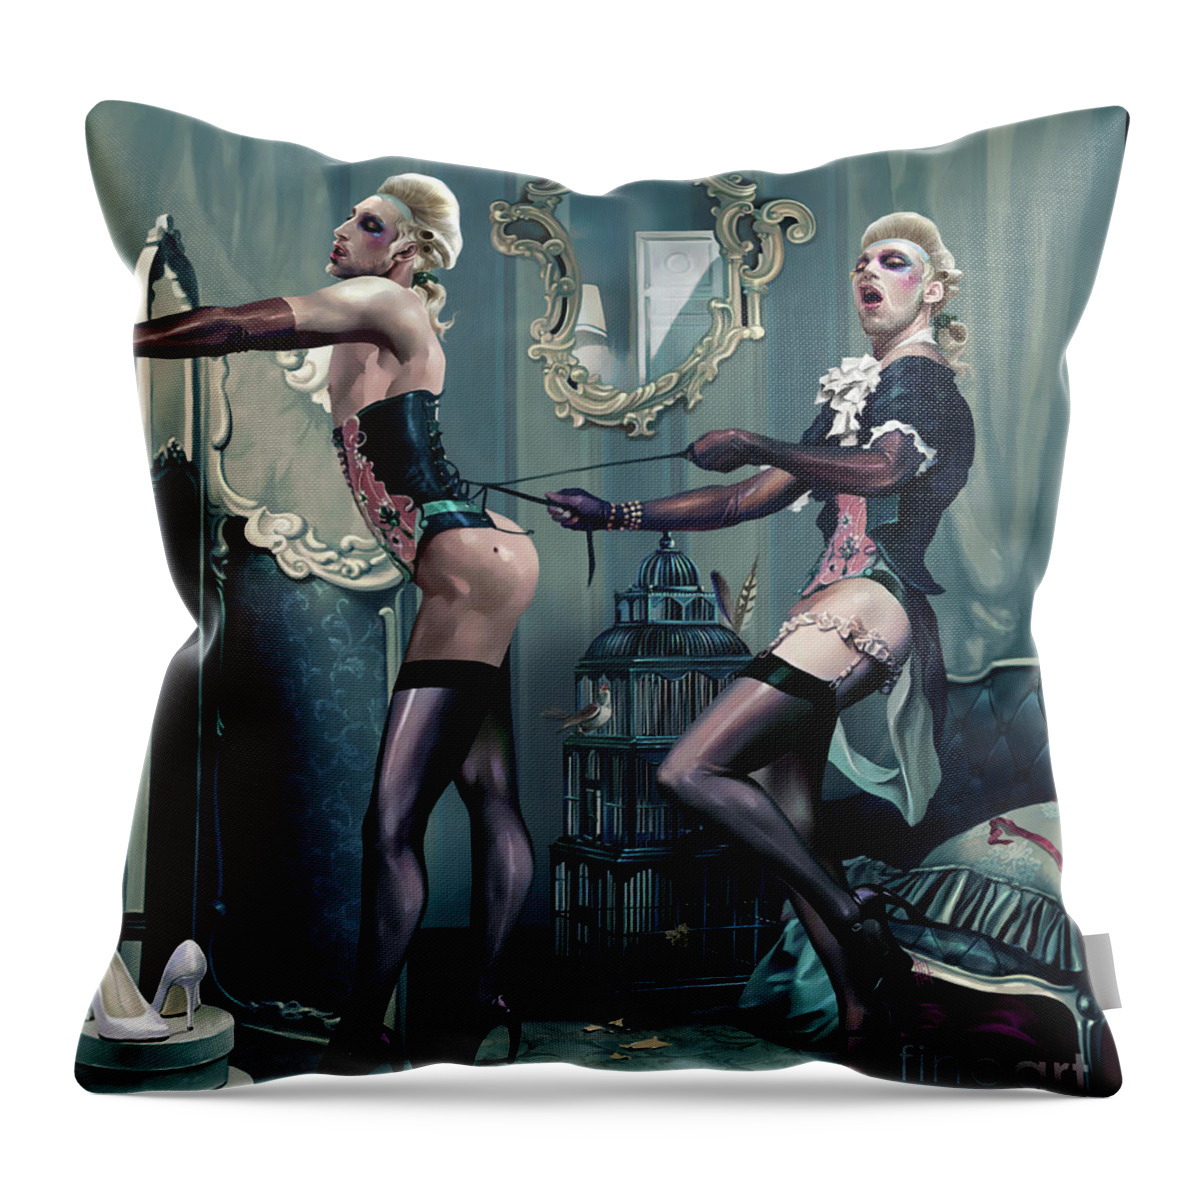 Boylesque Throw Pillow featuring the digital art The Beau Belle Brothers by Ali Franco